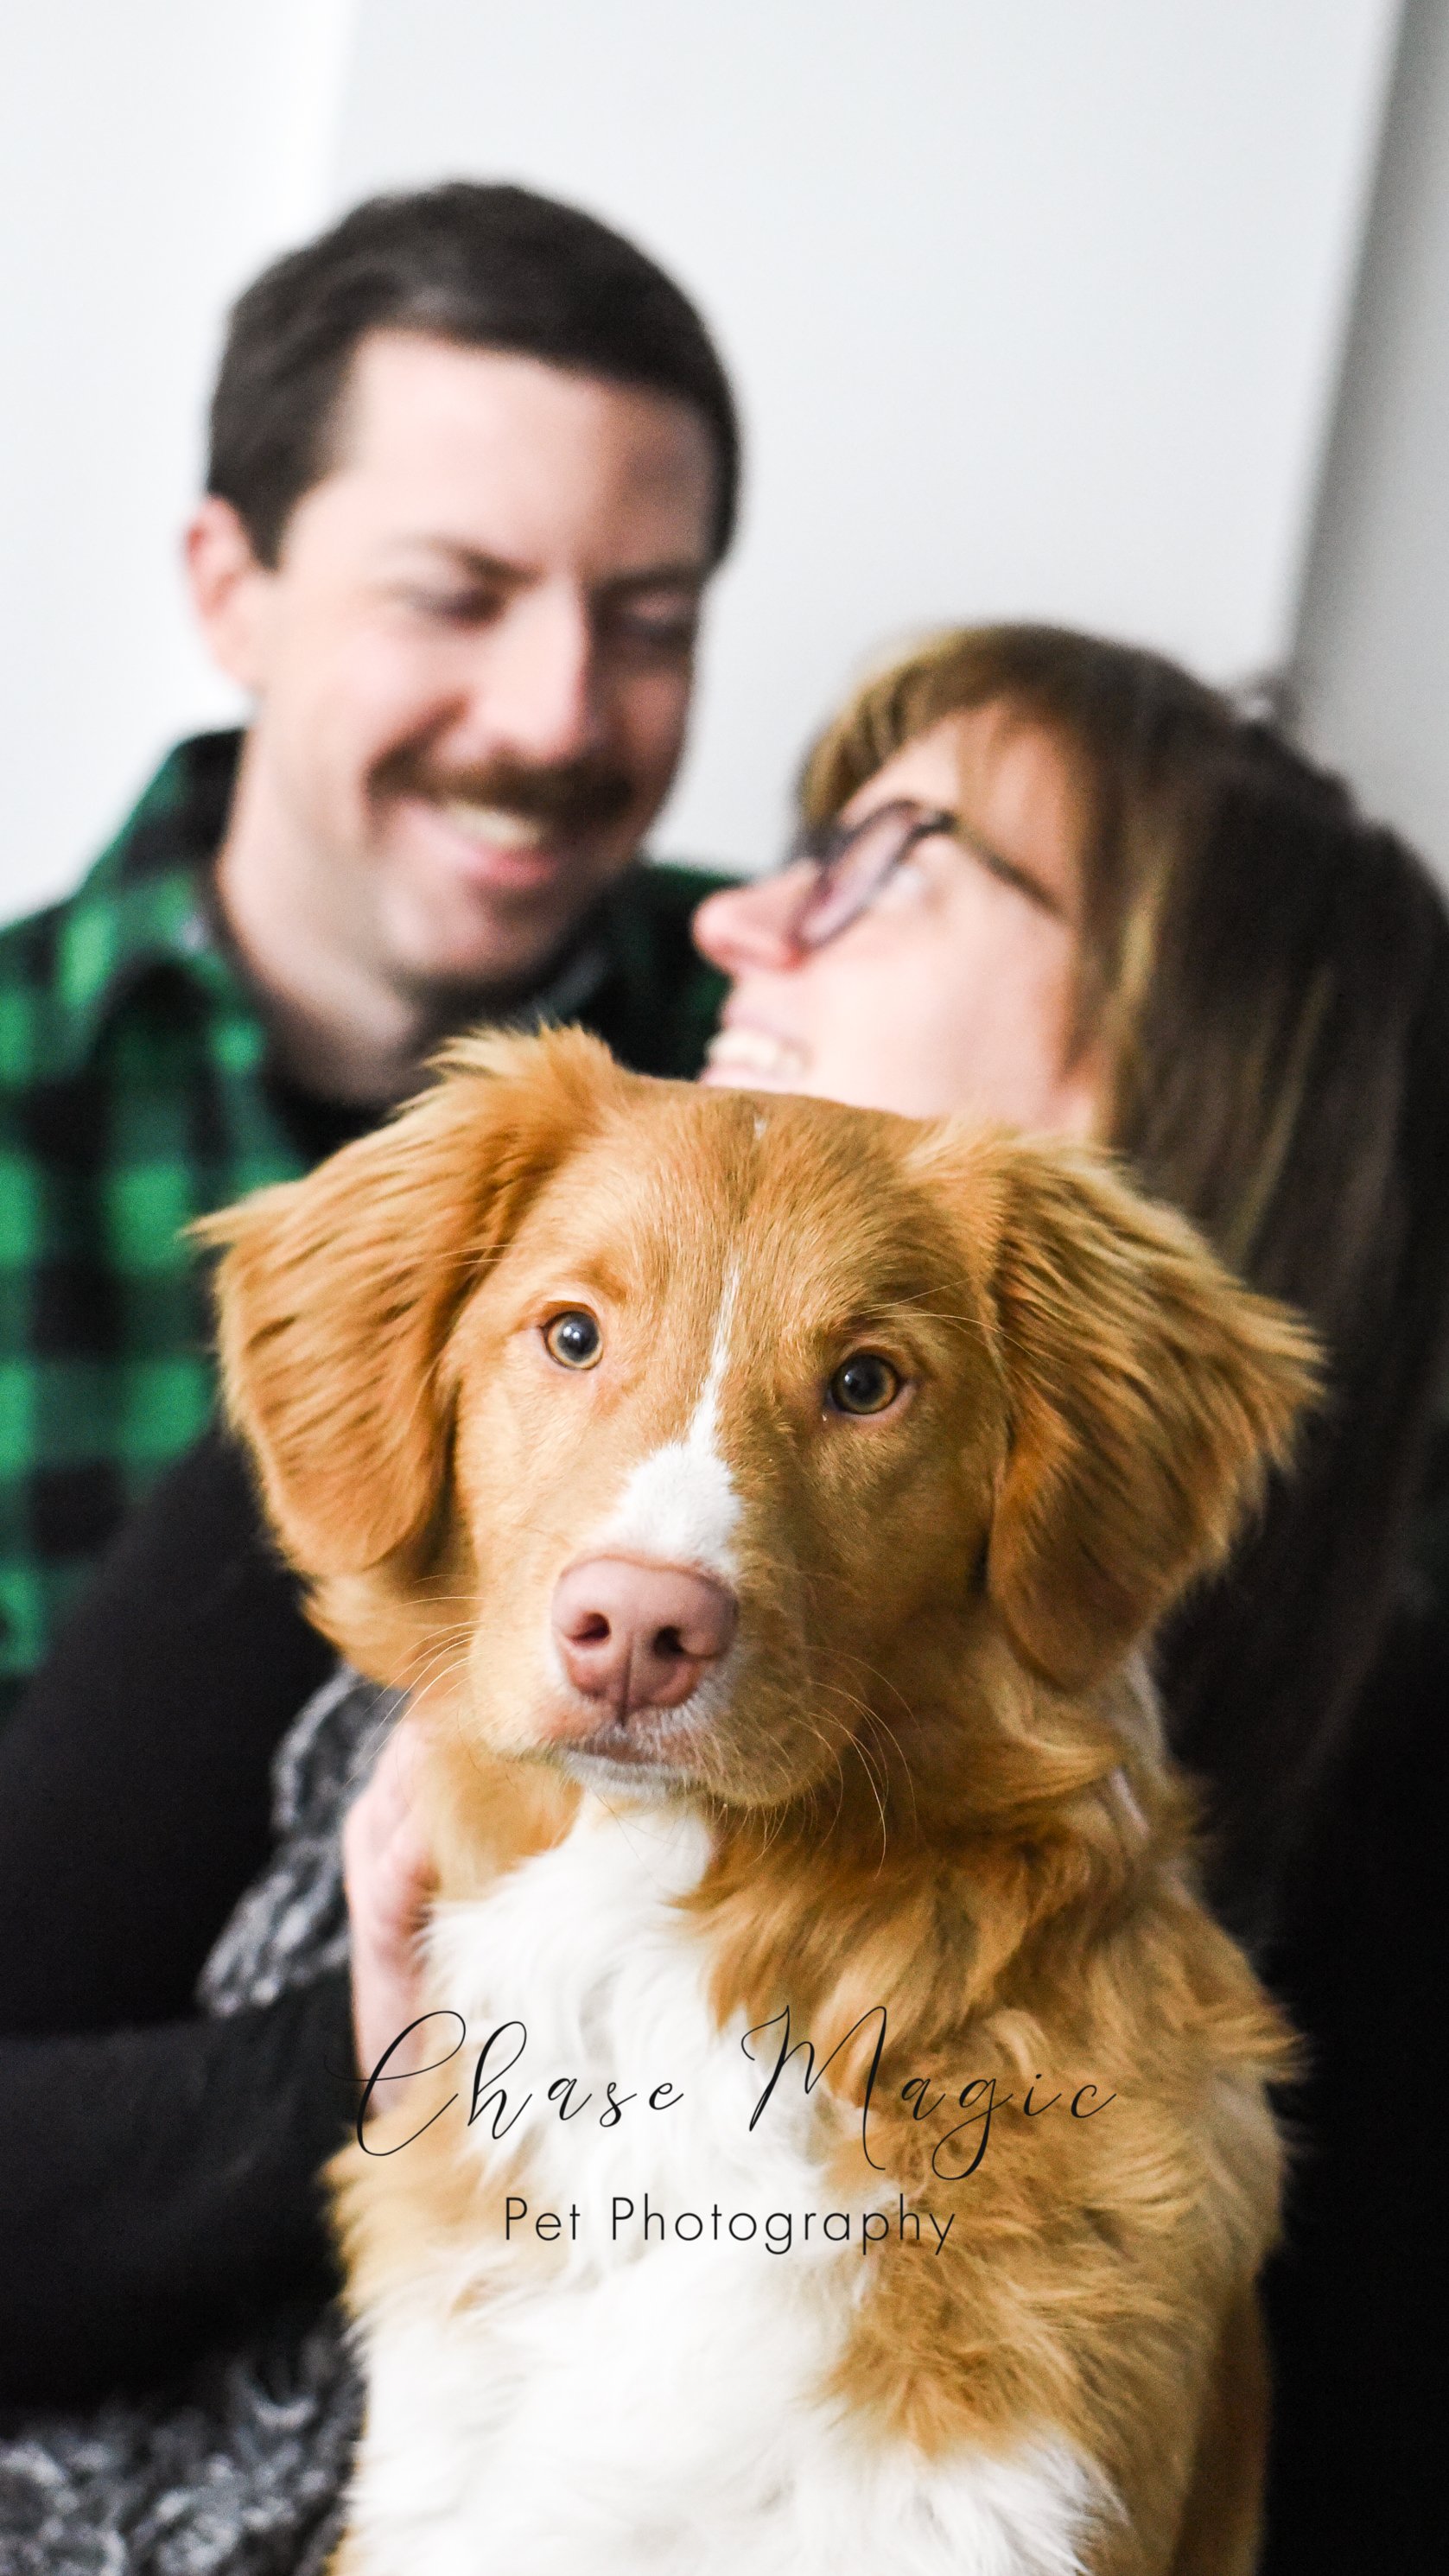 cute golden dog looking into the camera while sitting with a man in a green shirt and a women in glasses